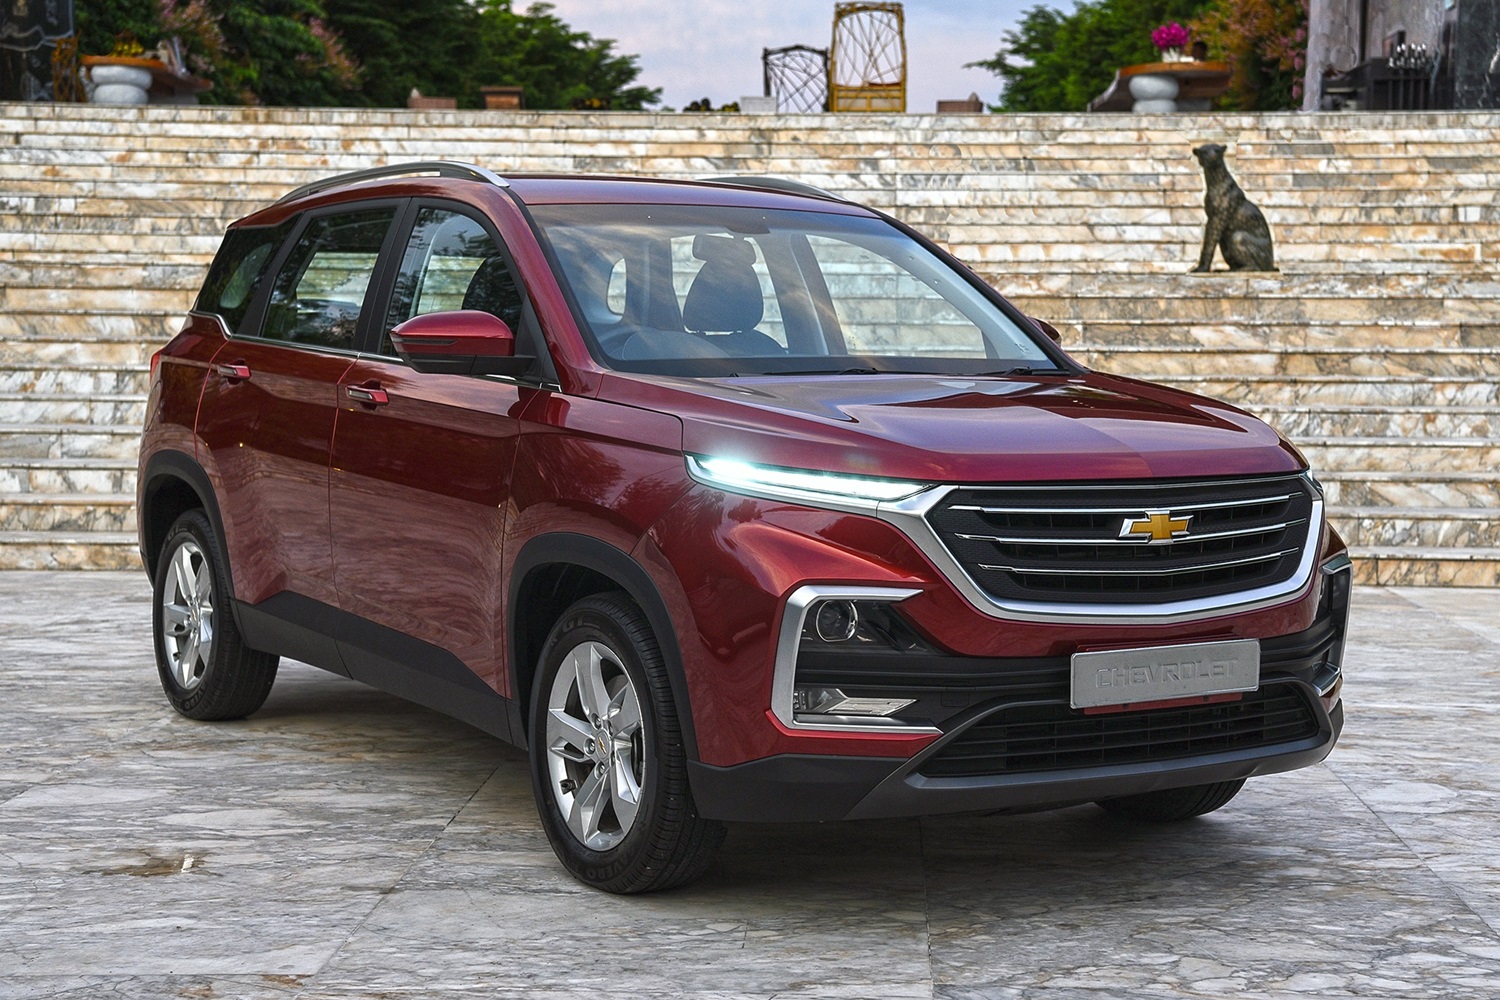 New Chevrolet Captiva Now Available In The Middle East Gm Authority